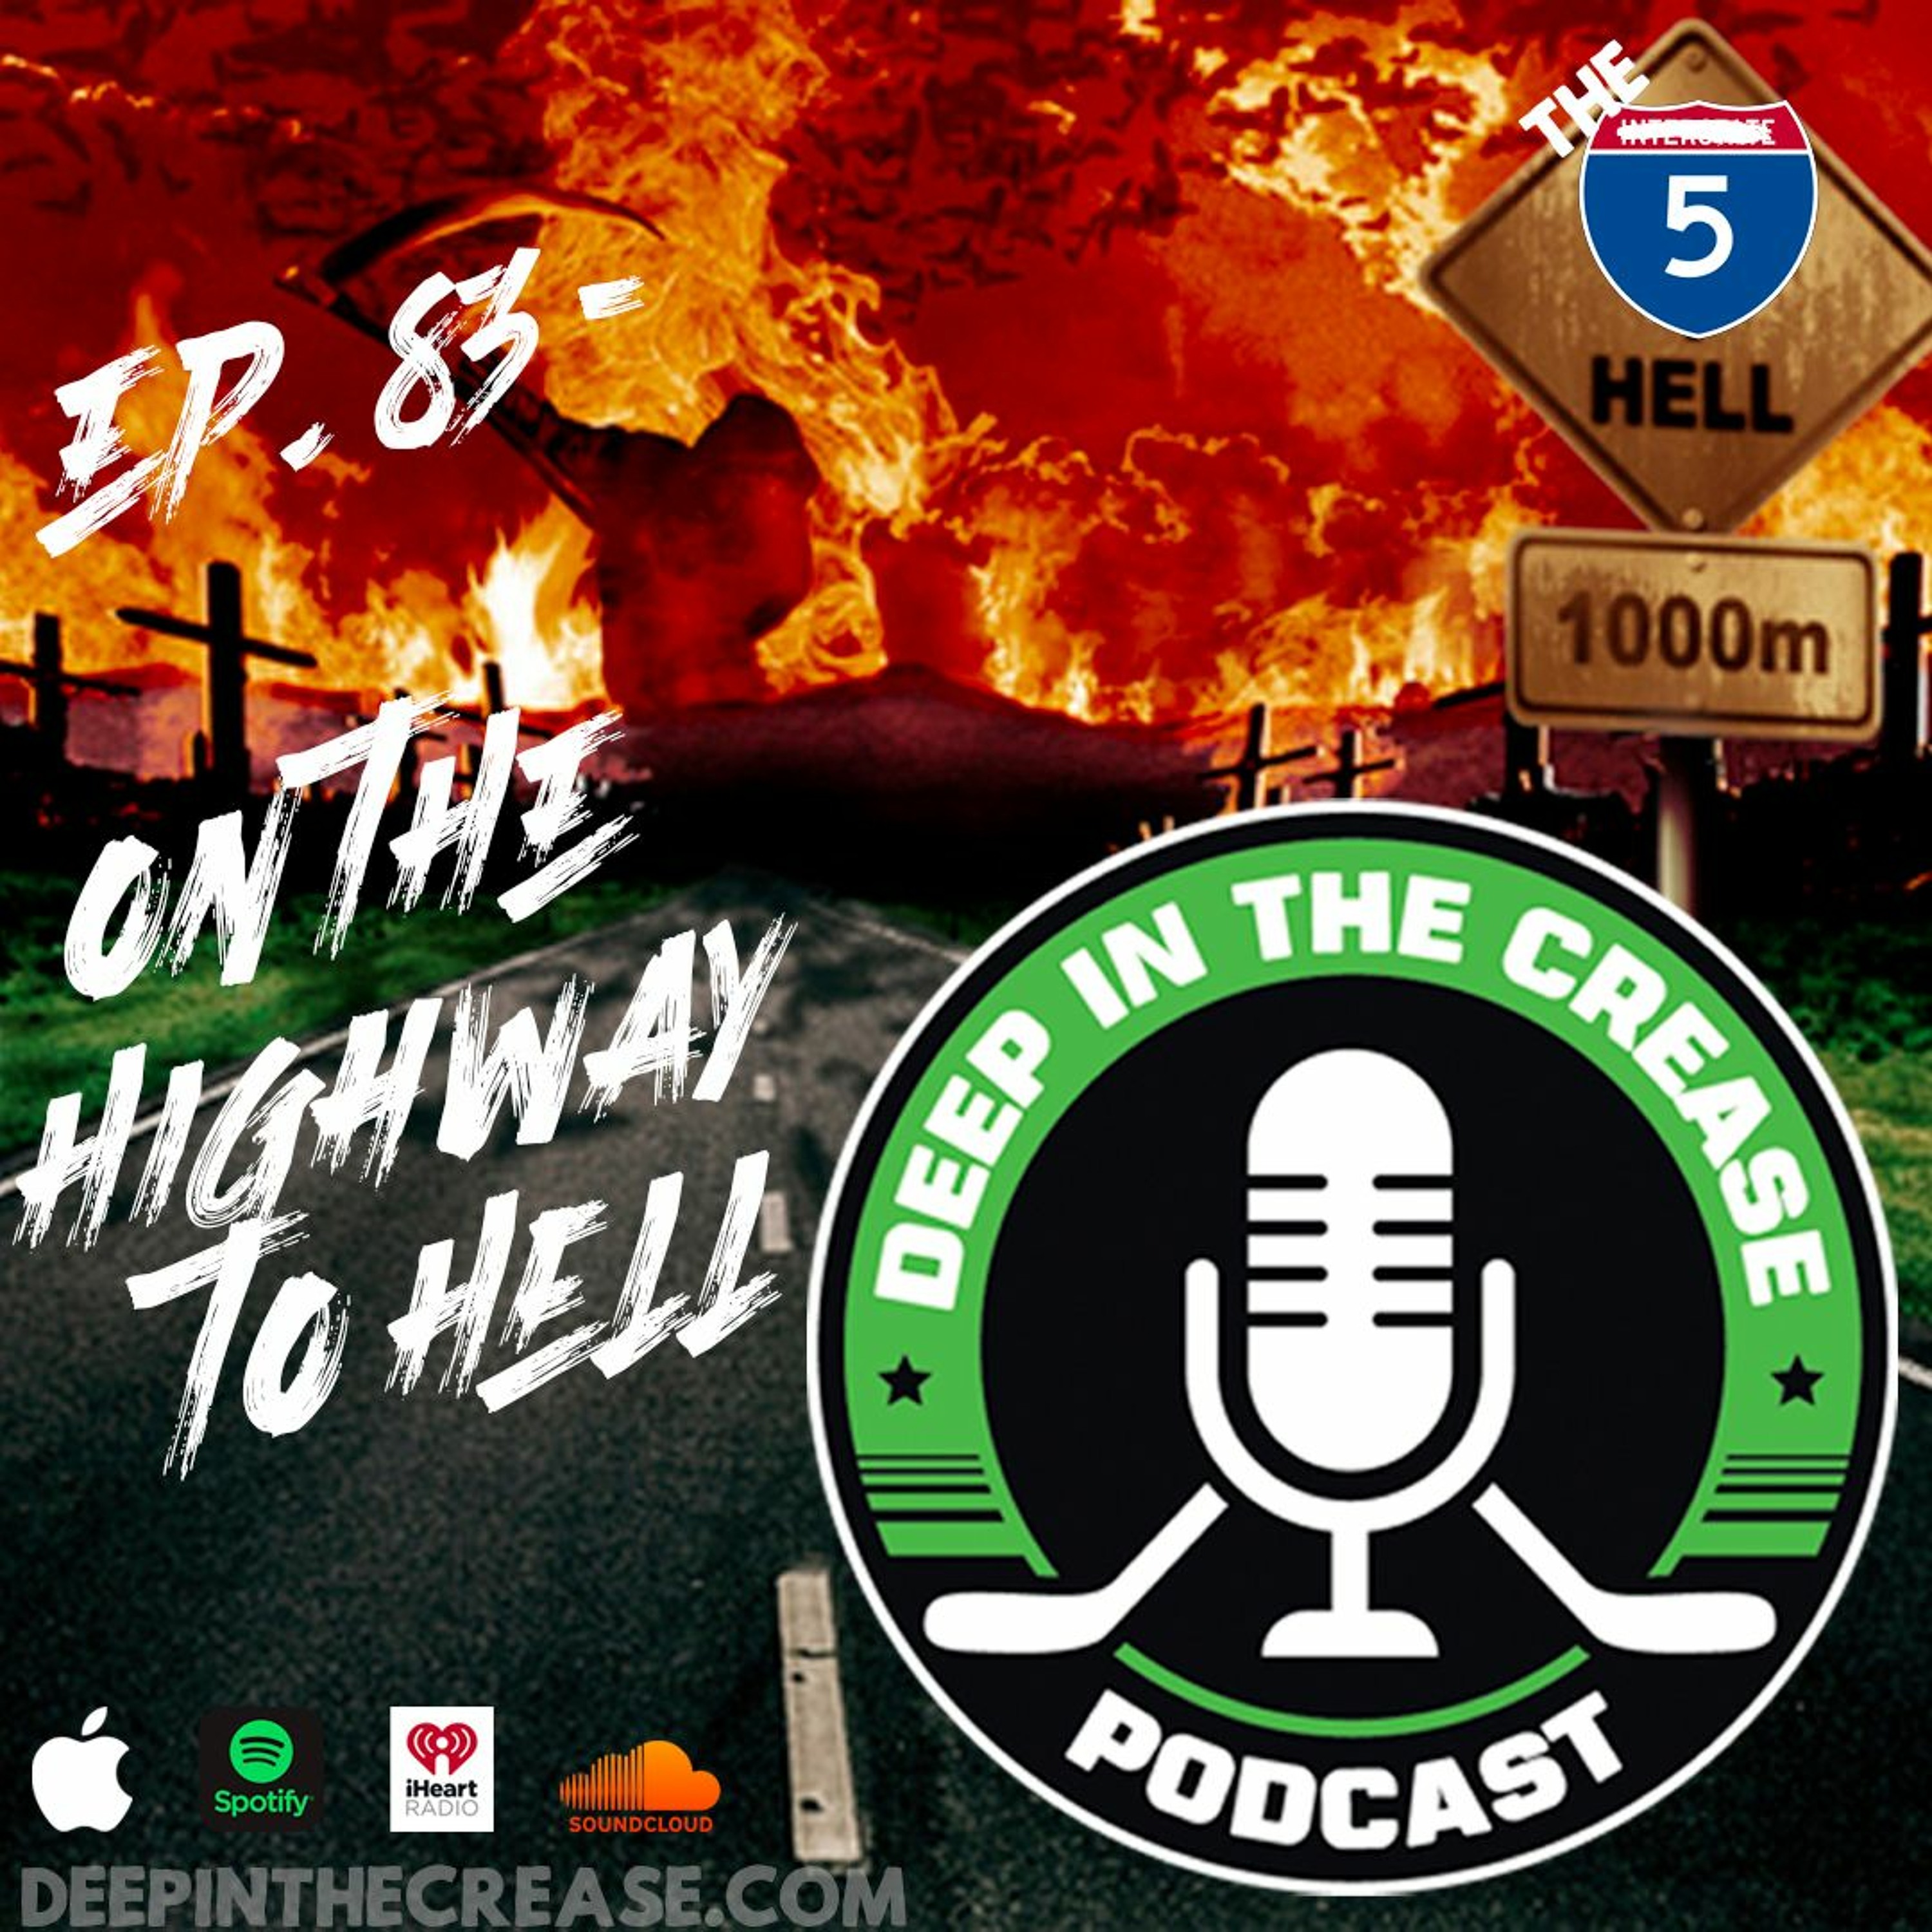 Episode 83 - On THE Highway To Hell